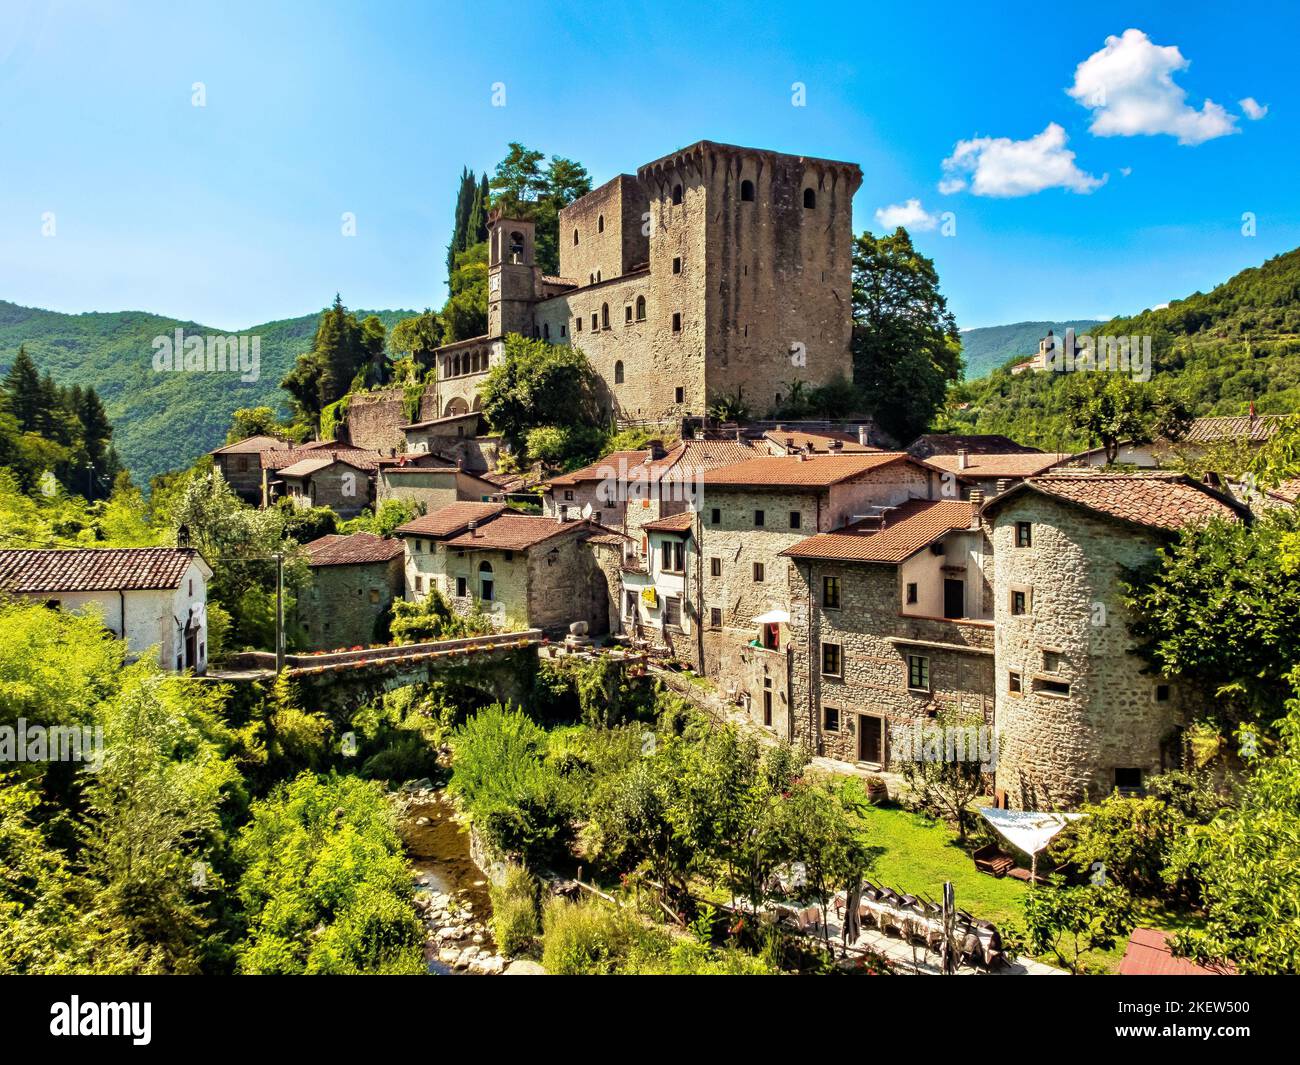 Medieval fortress of Verrucola in Tuscany, Italy, on the green hills of Lunigiana, in Toscana, Italy, with stone bridge crossing a stream. Stock Photo